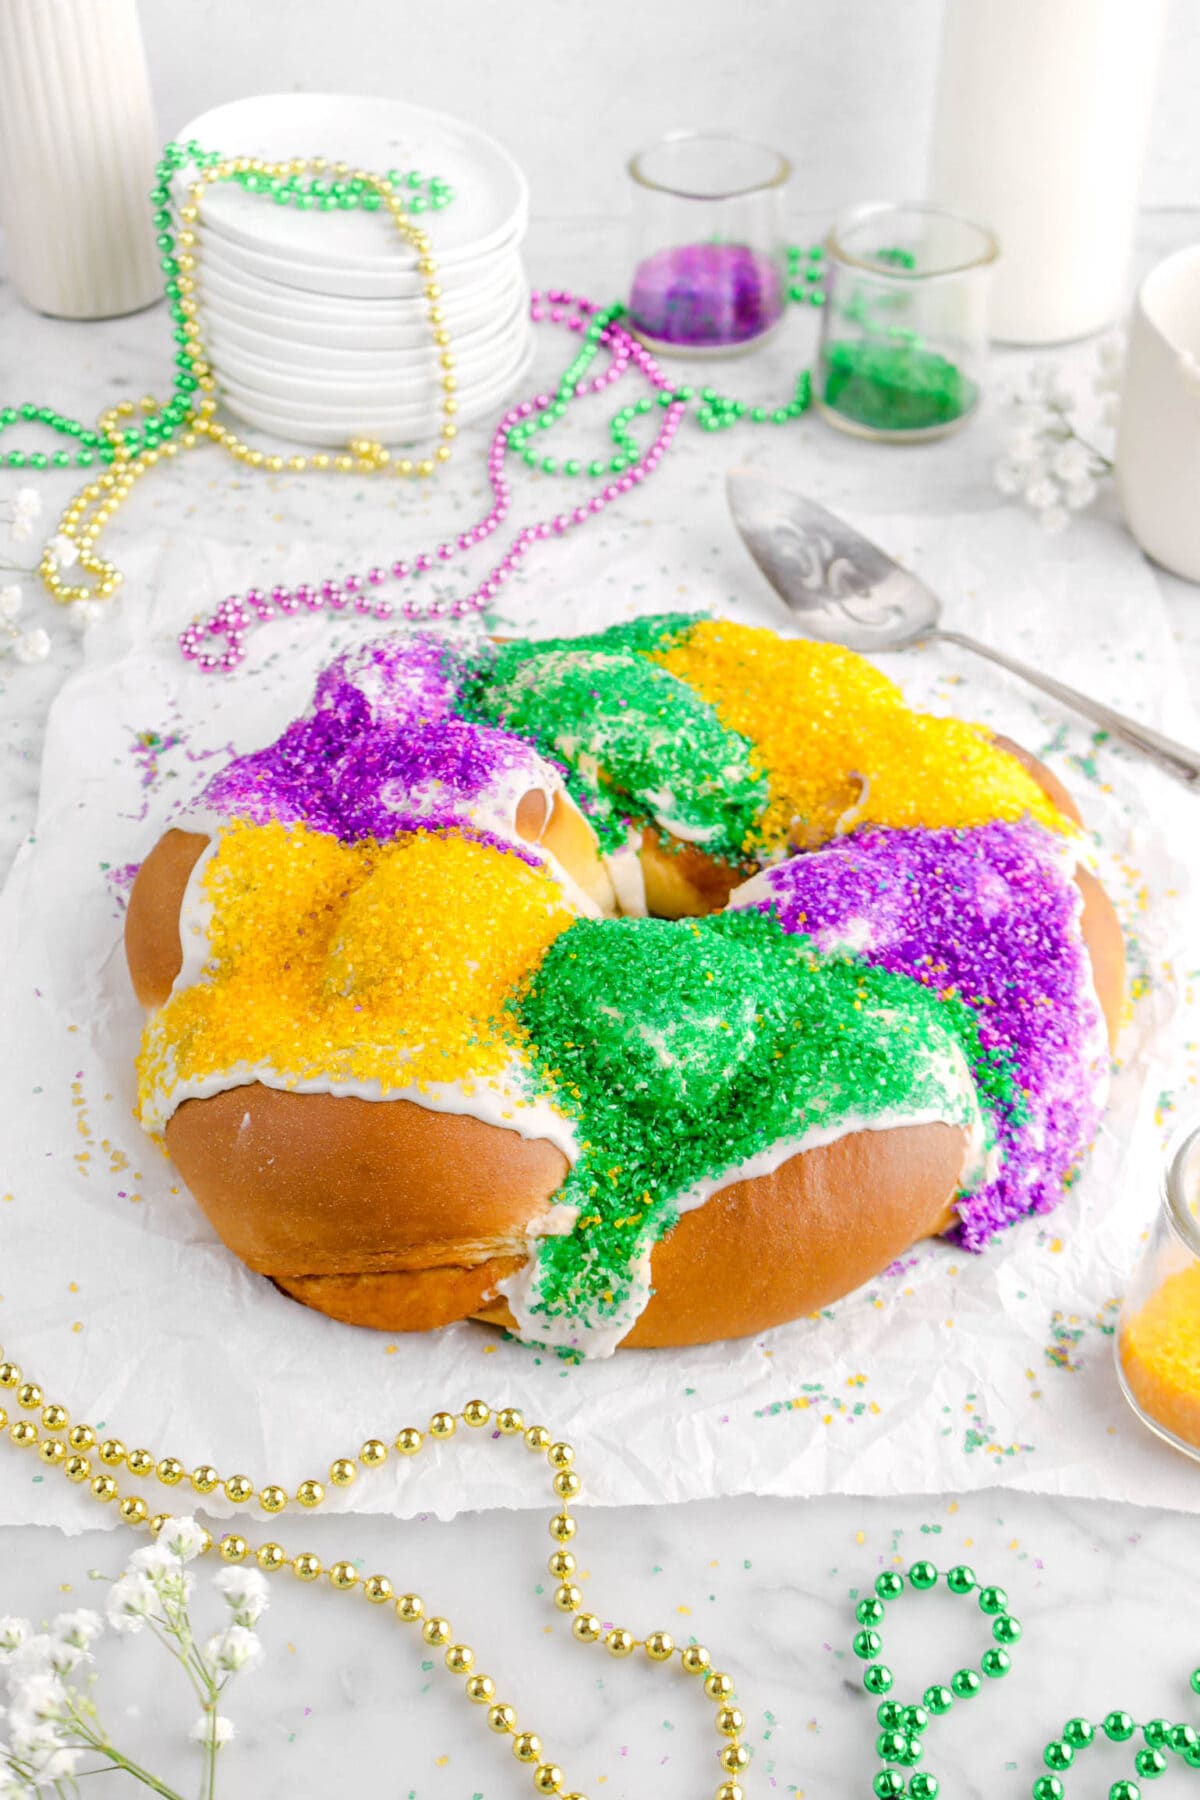 angled close up of king cake on parchment paper with mardi gras beads and decorative sugar around